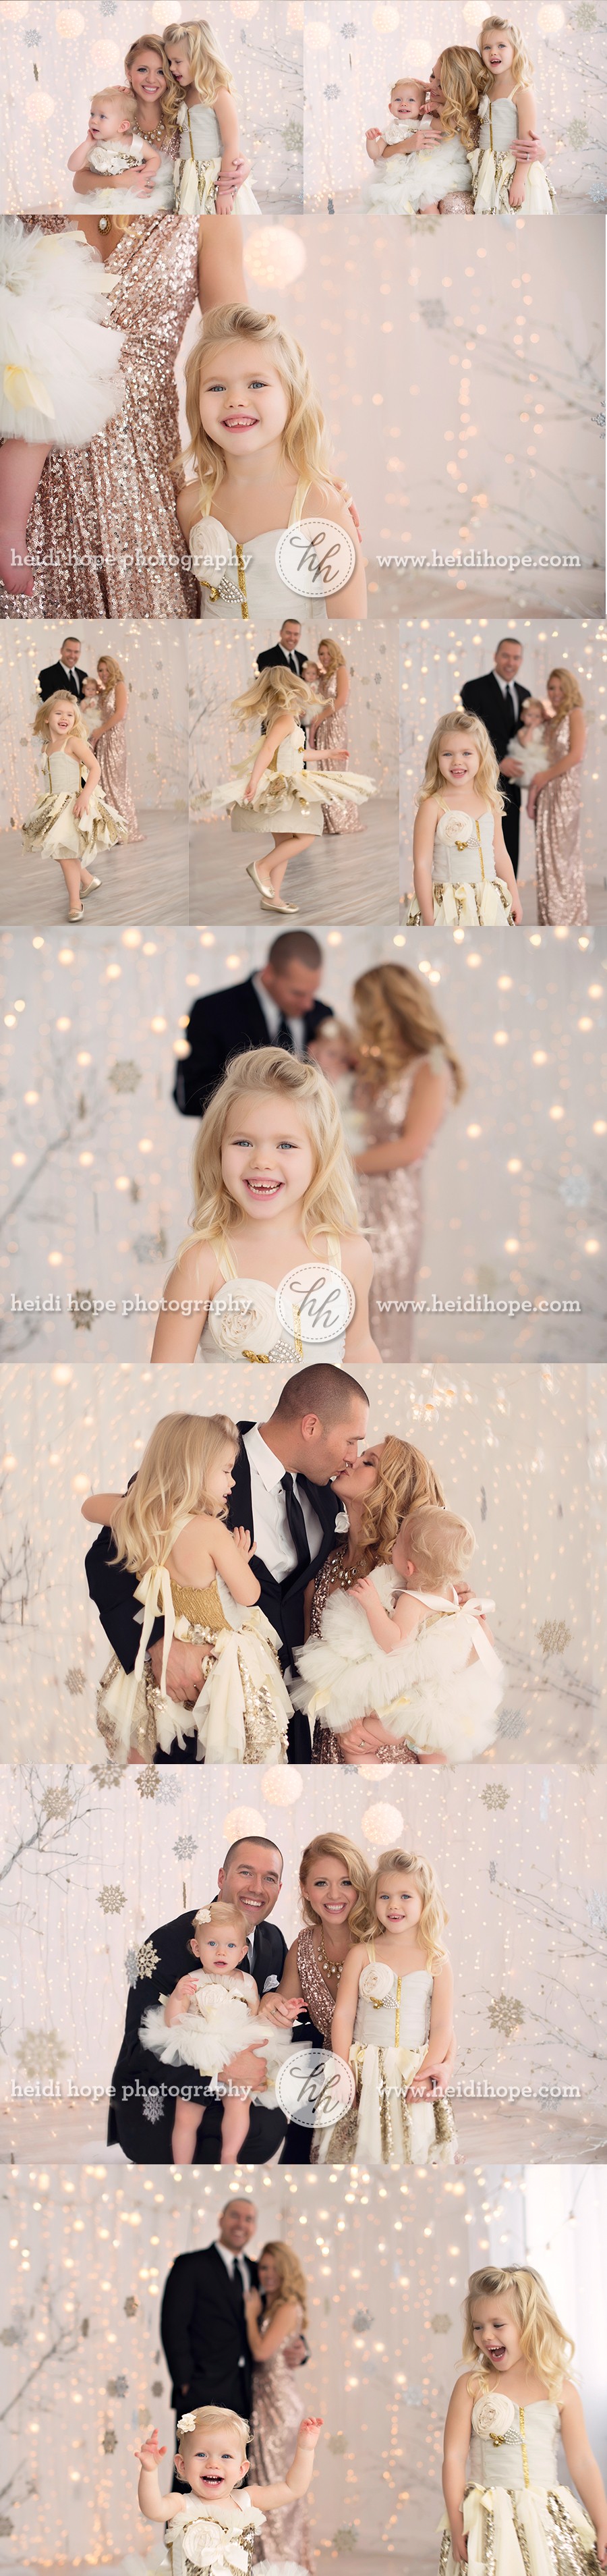 holiday family portraits with lights 2